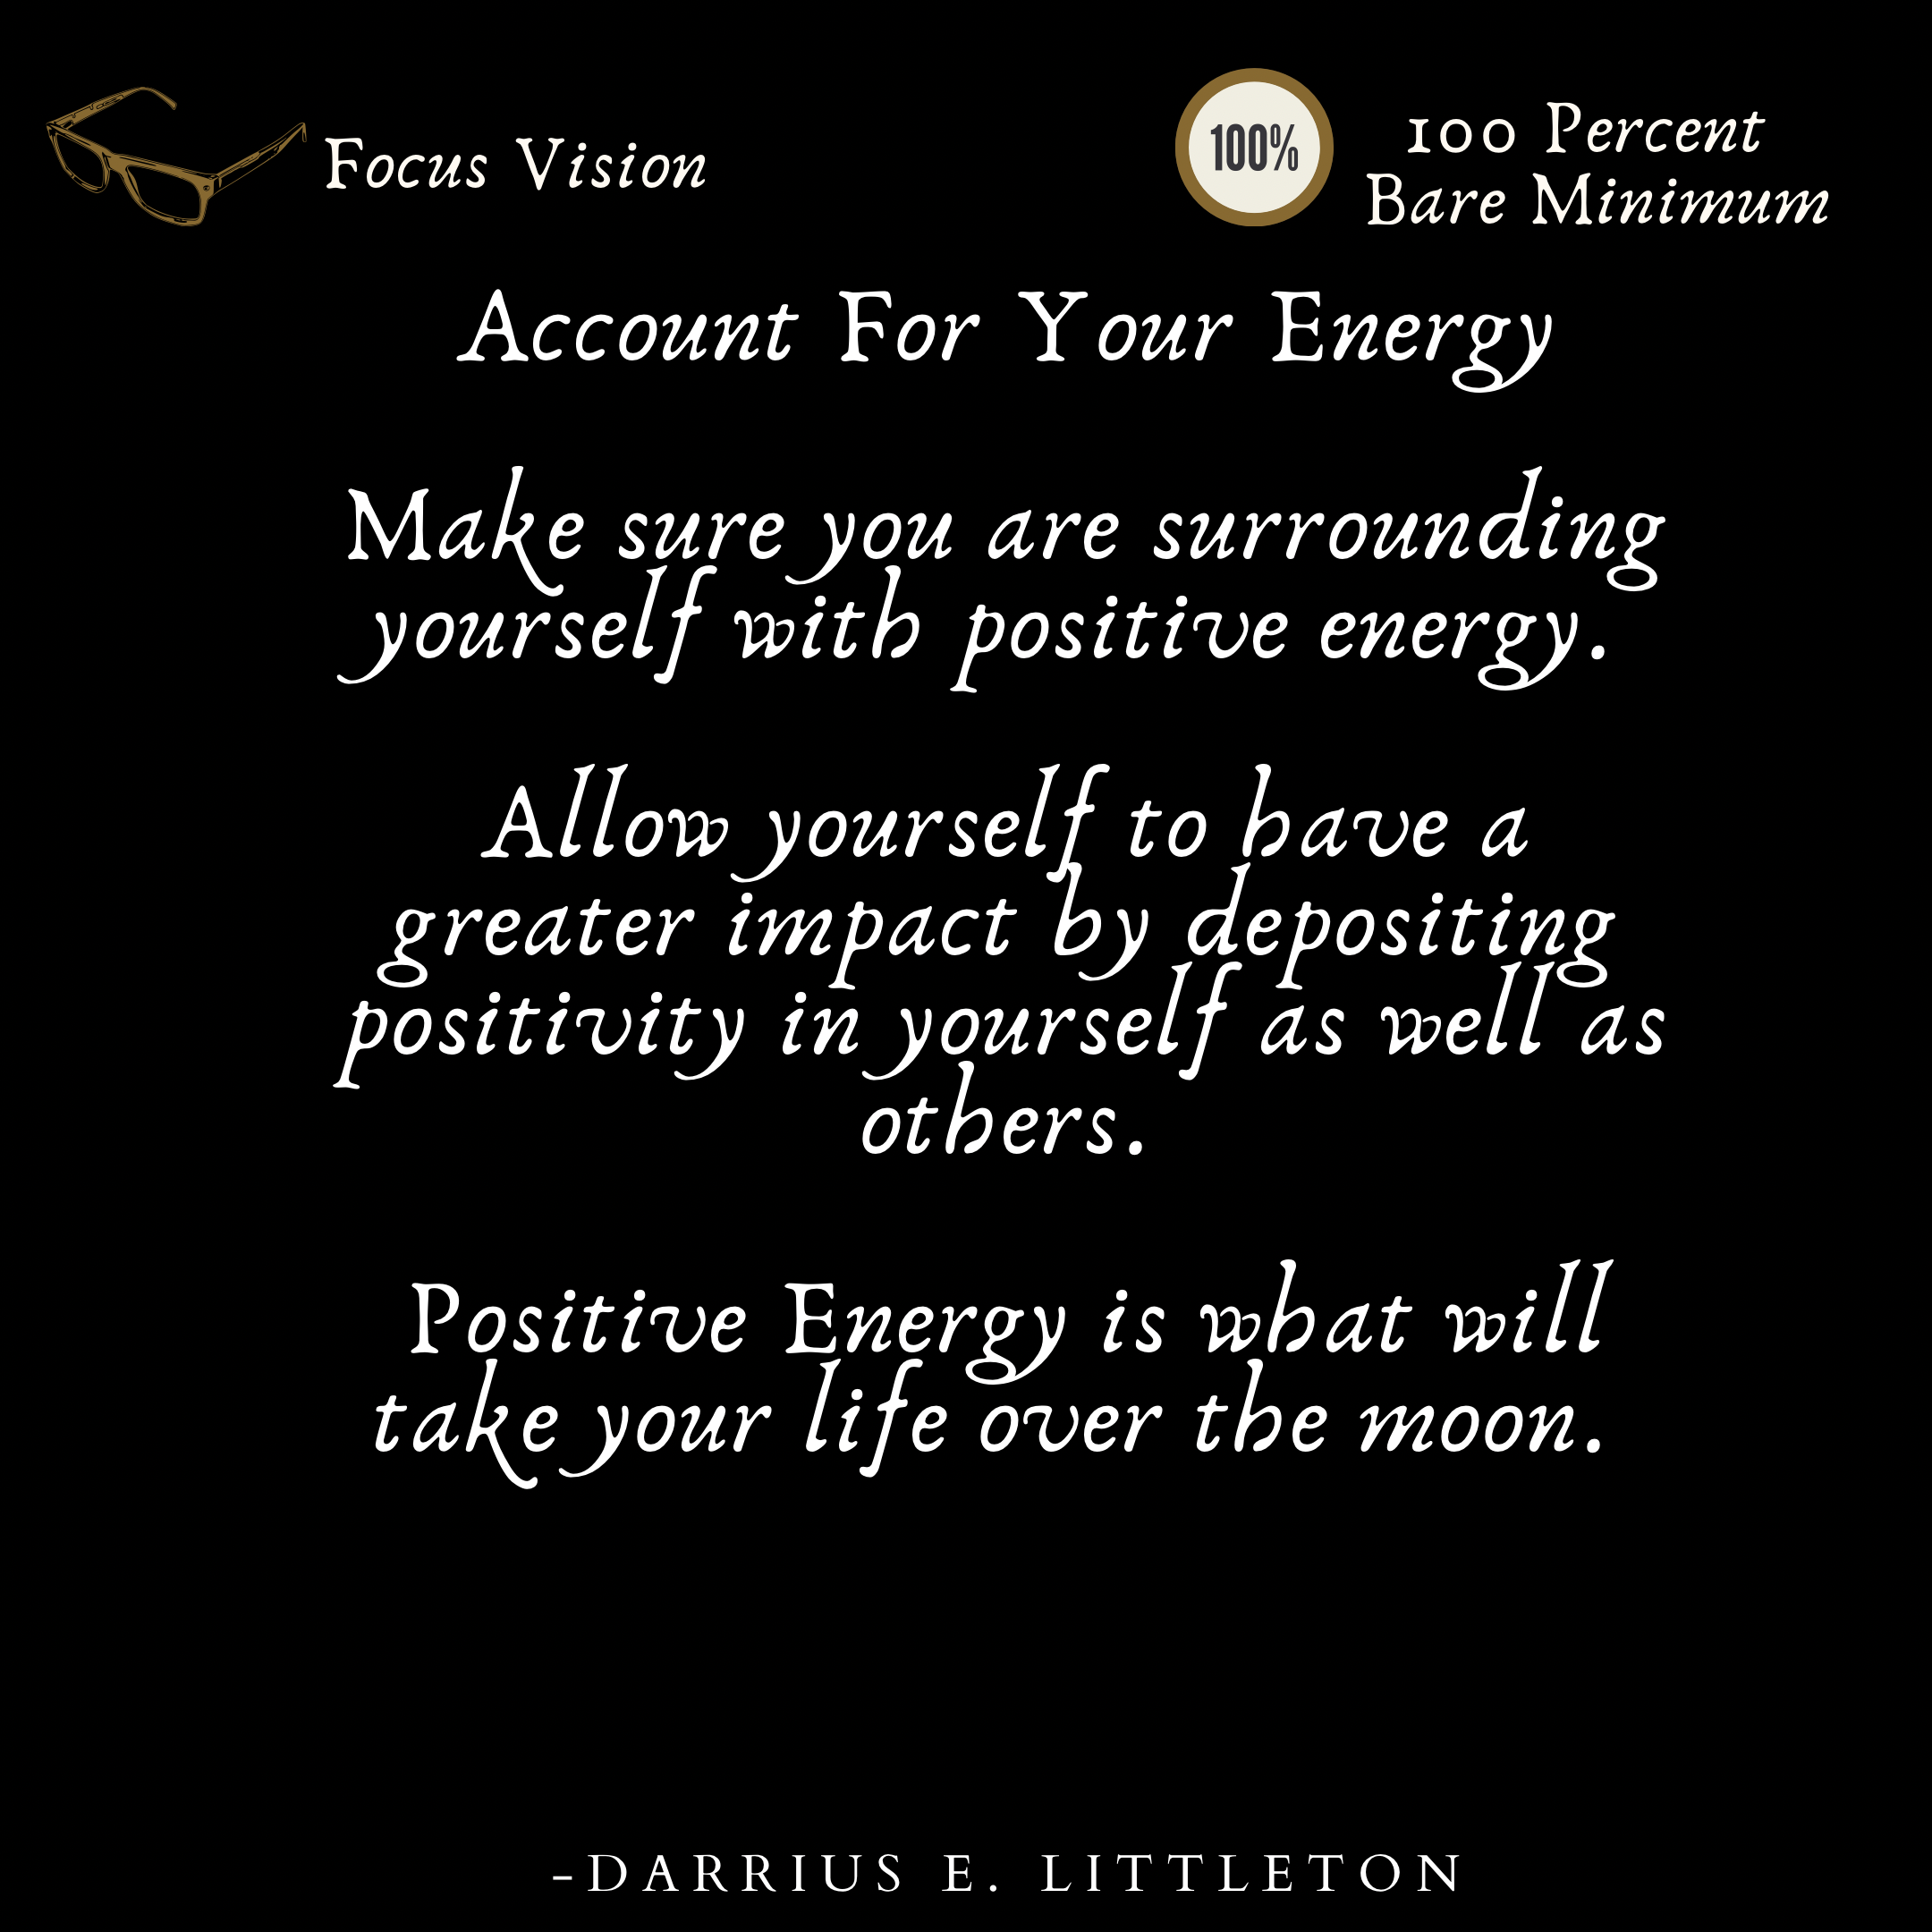 Account For Your Energy